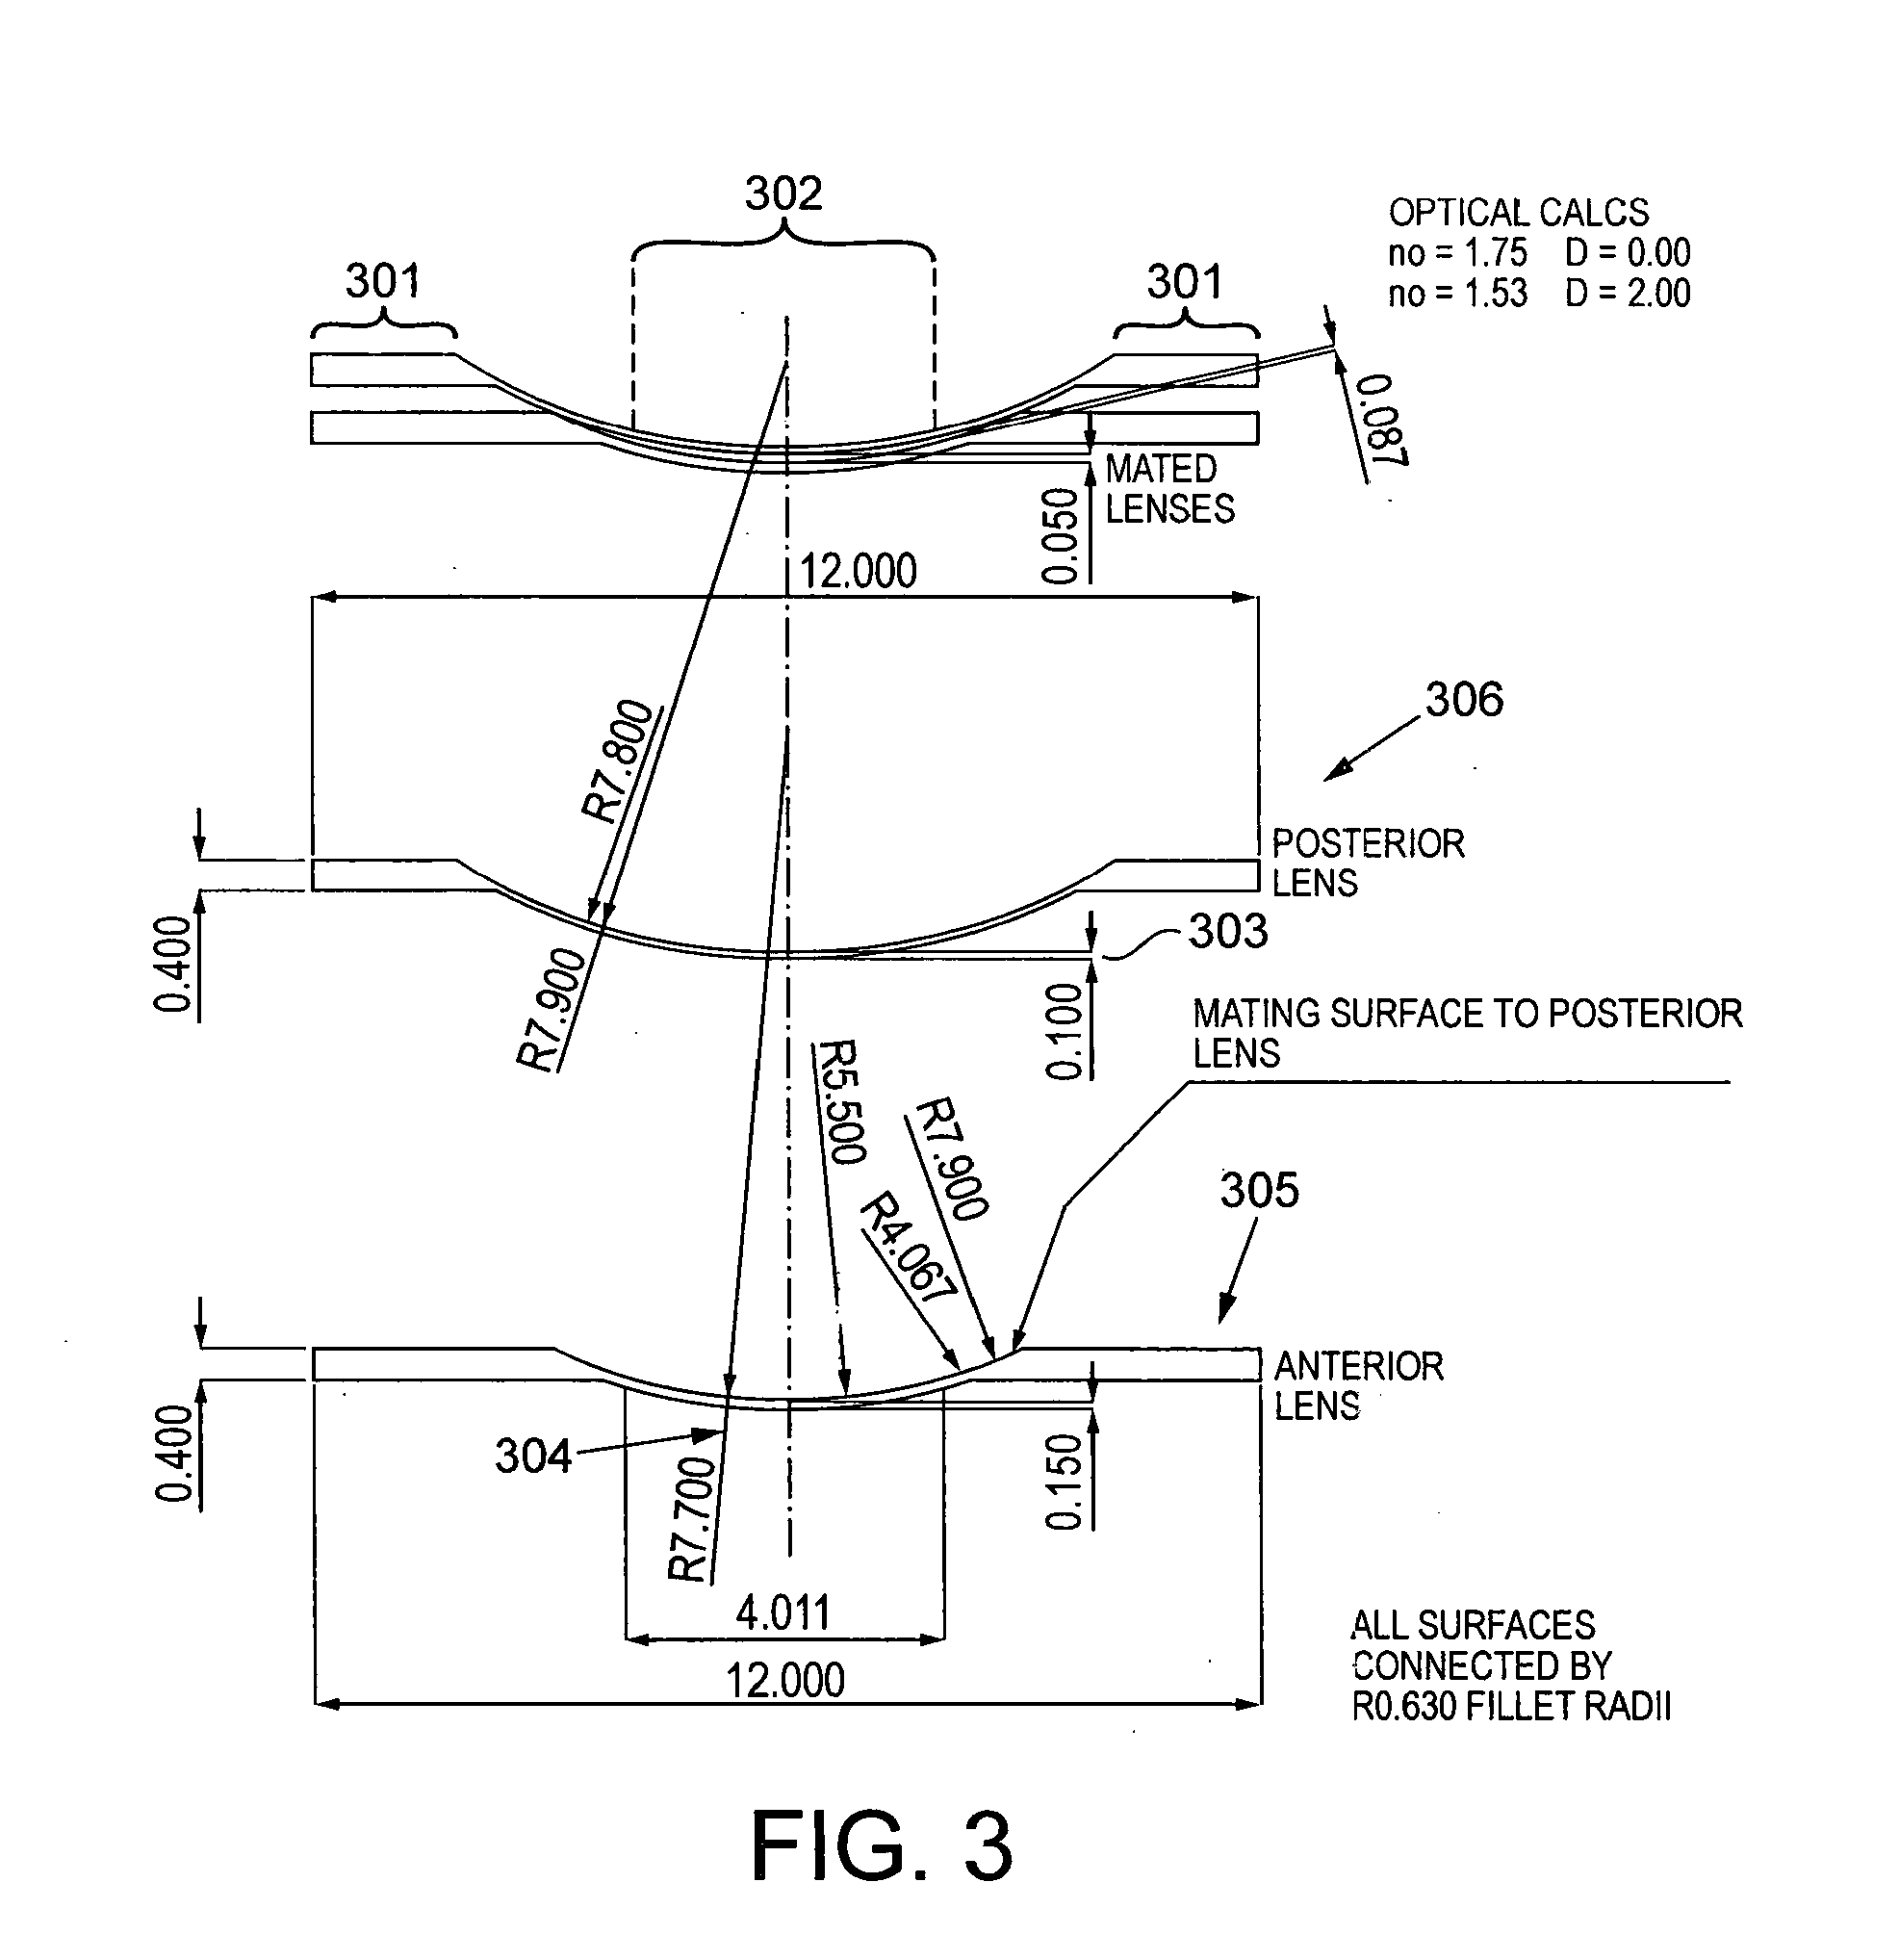 Liquid crystal device and method of manufacture